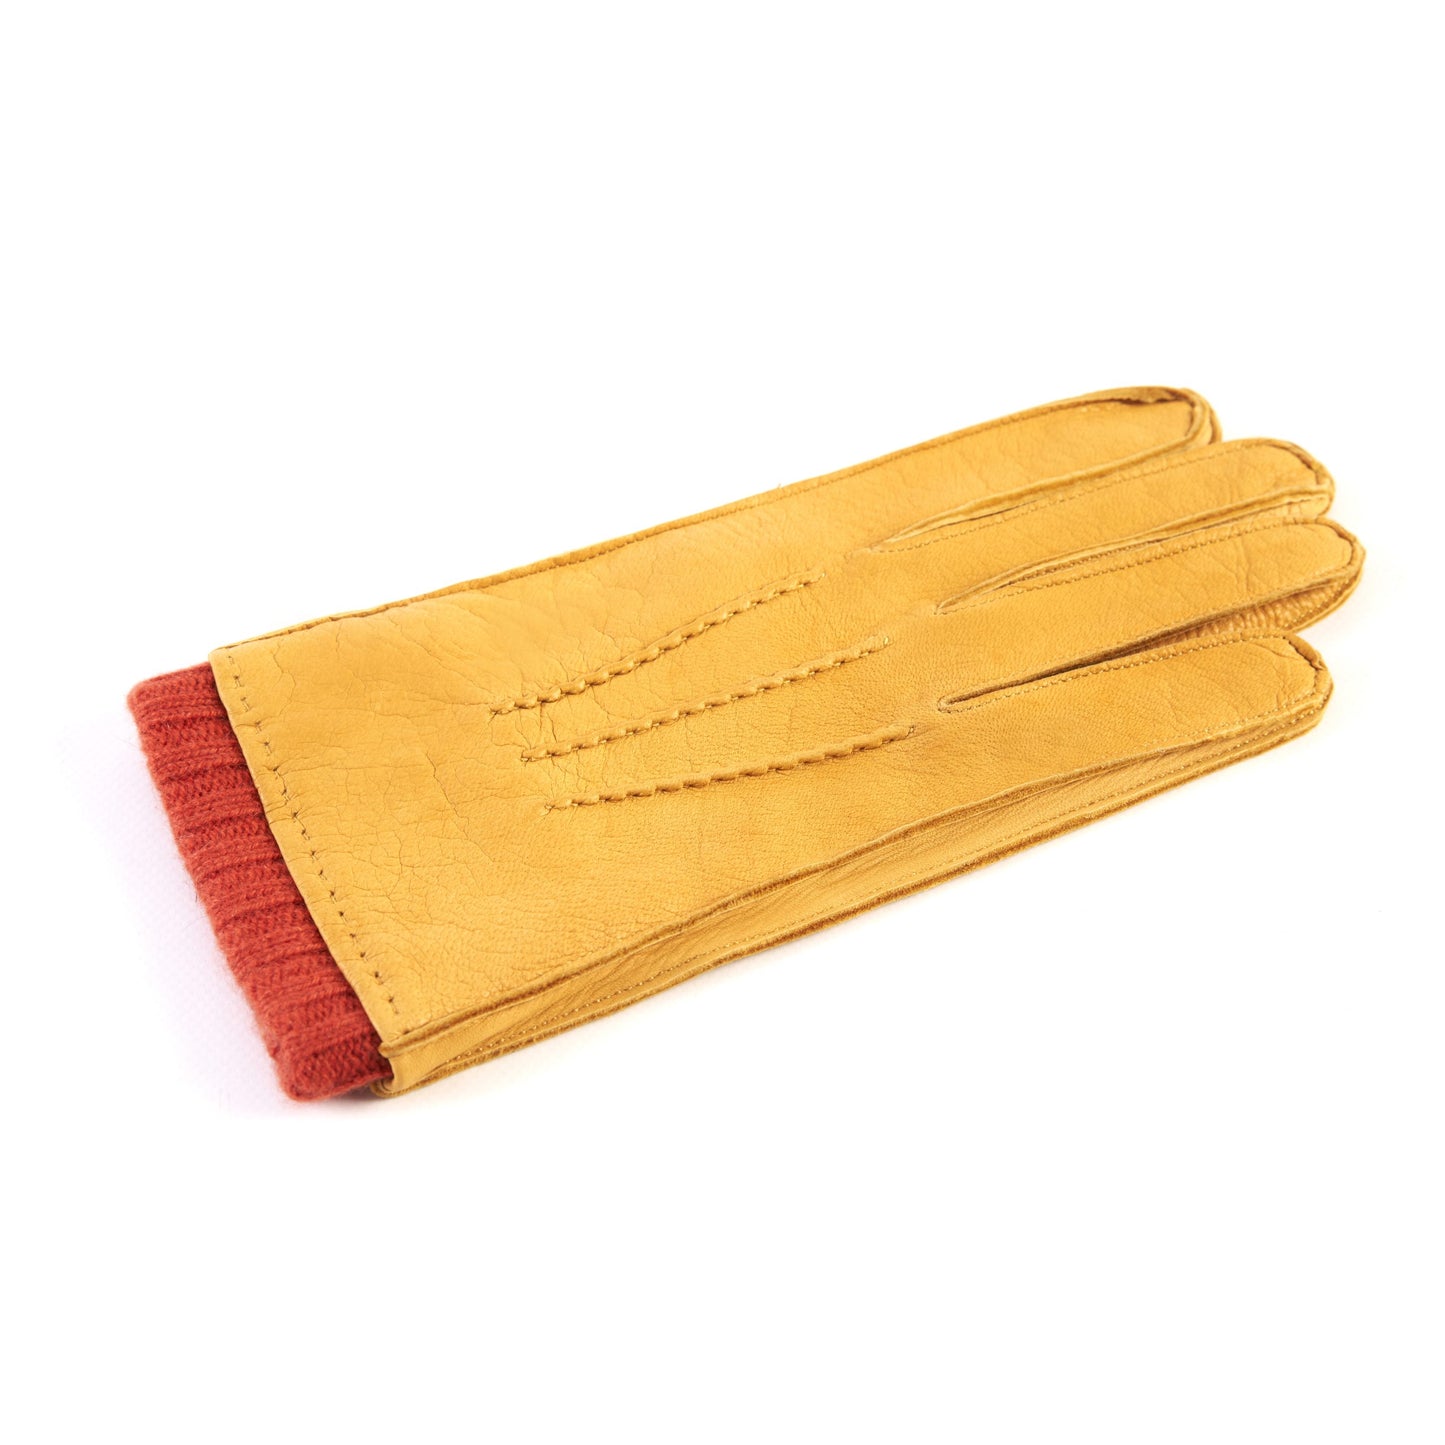 Men's yellow deerskin gloves with orange cashmere lining with cuff